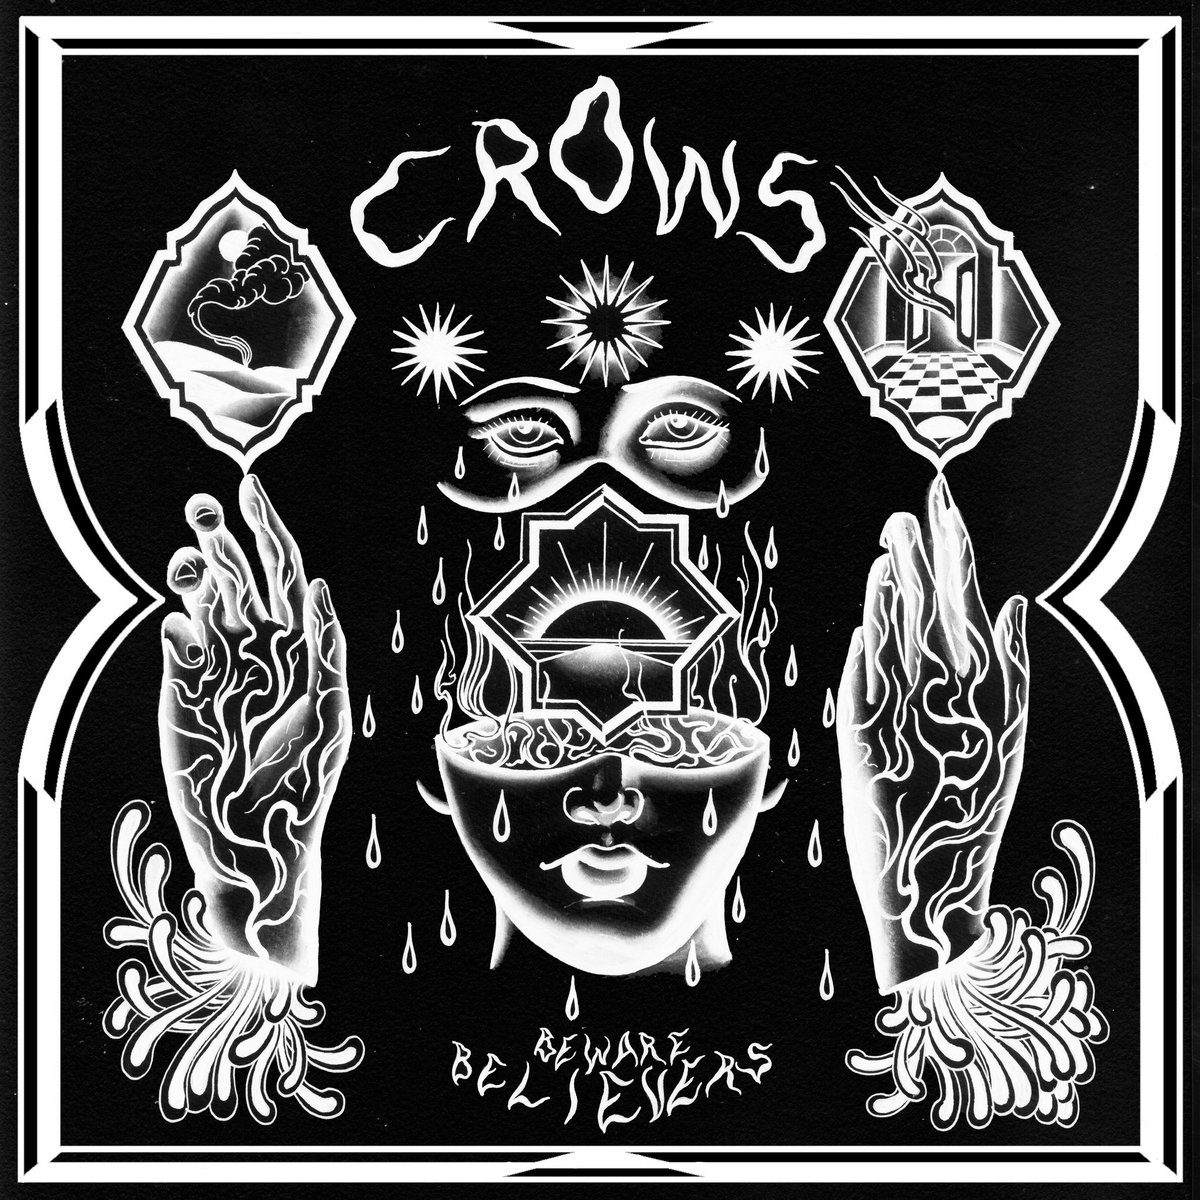 CROWS cover